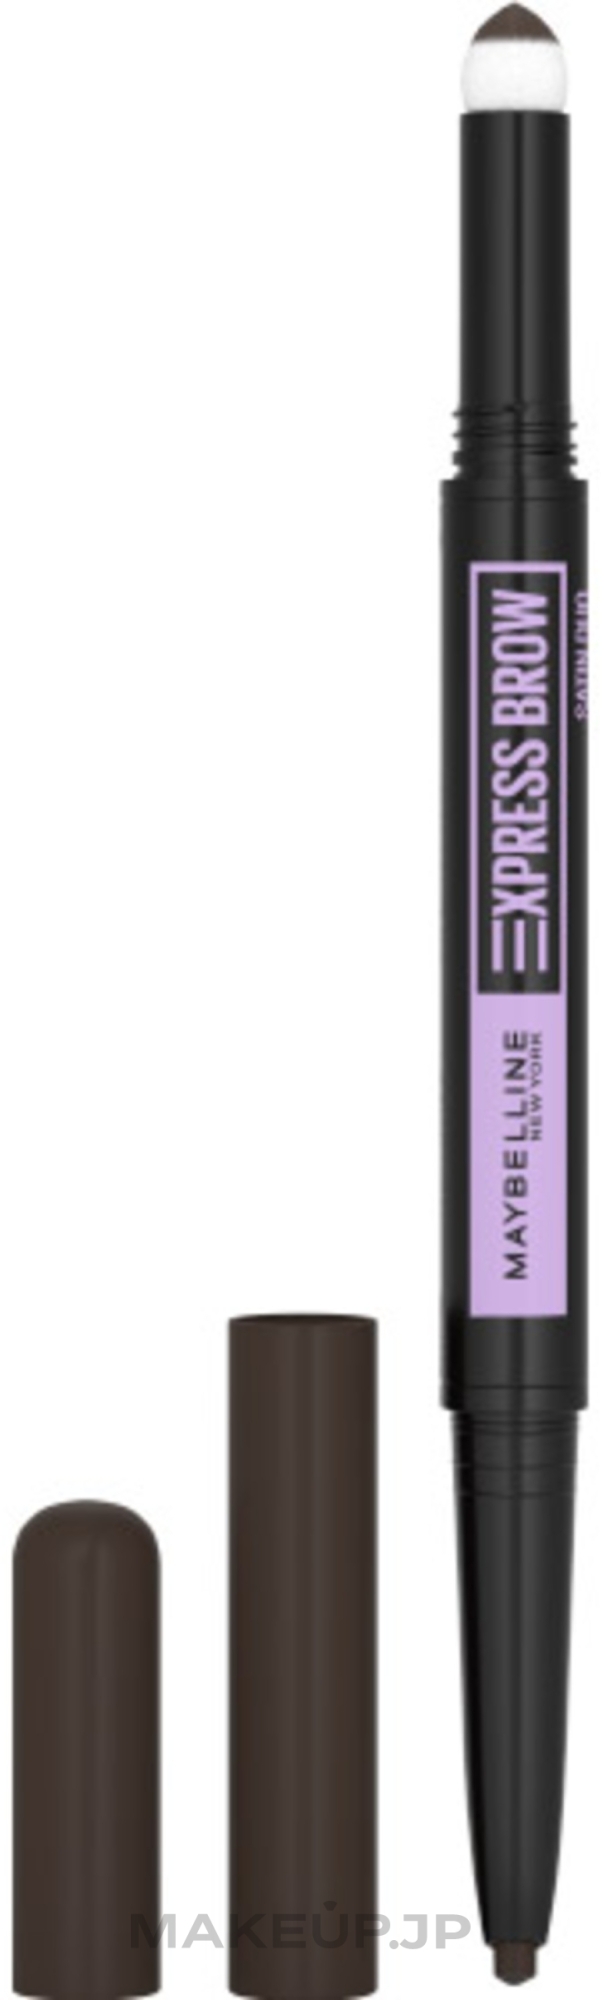 2-in-1 Pencil and Powder - Maybelline Express Brow Duo — photo Black Brown